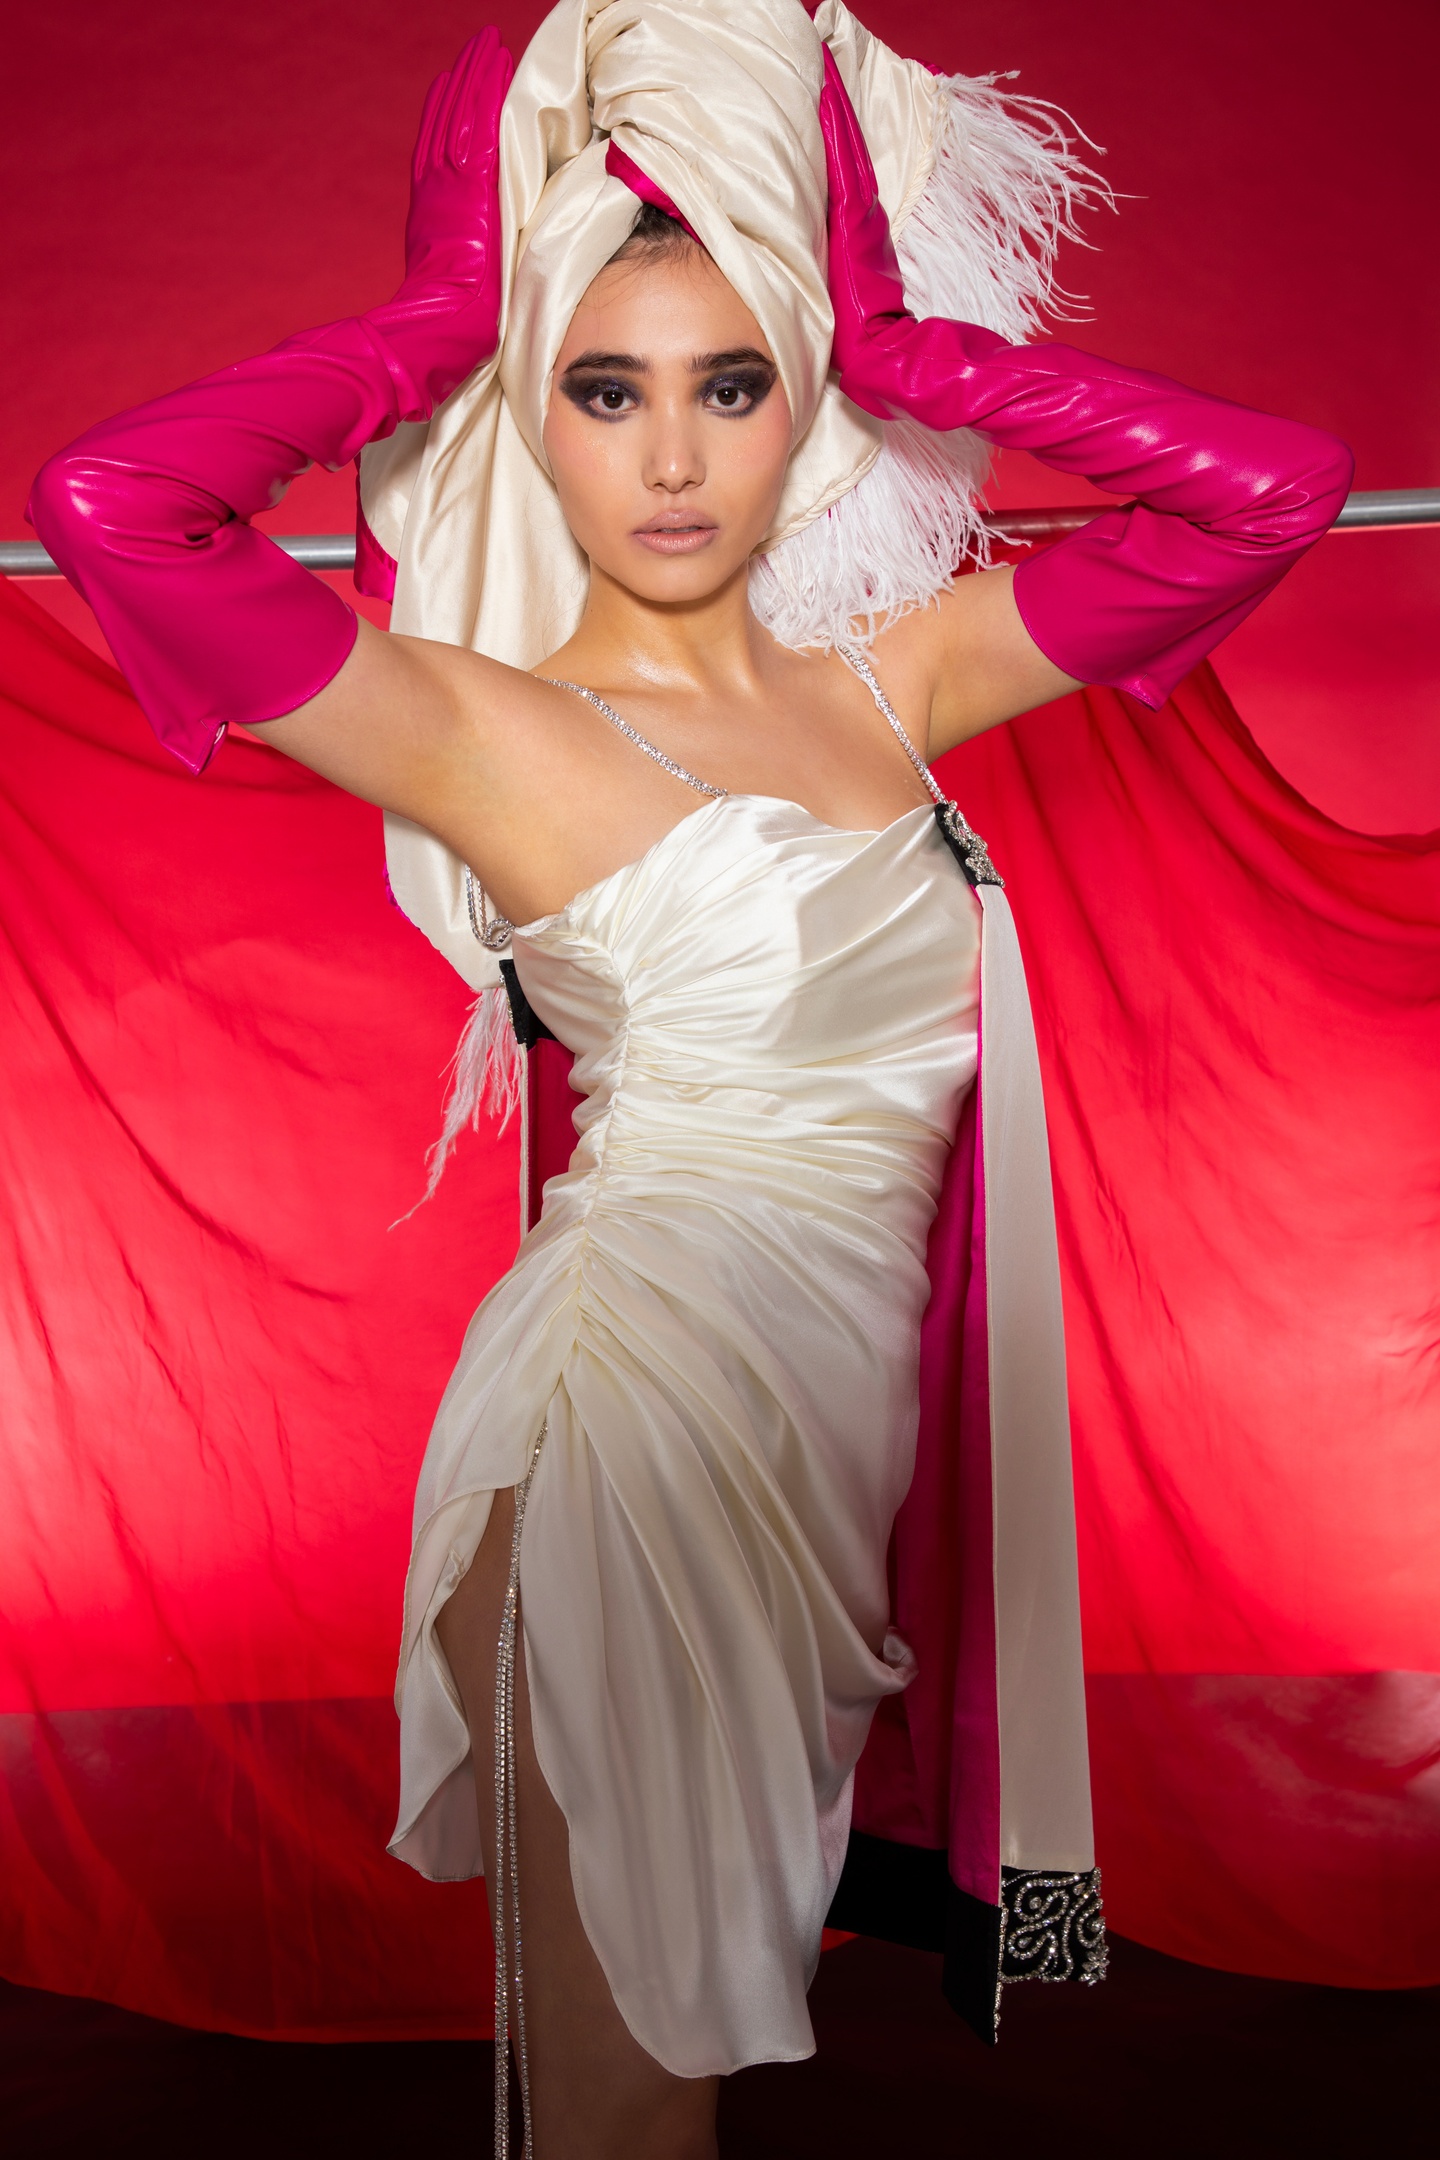 Model wears a short white satin dress cinched up along the side edges to create wrinkles. The dress has two rhinestone studded spaghetti straps and a cape-like panel in white satin lined with magenta attached to the upper left breast. Model wears pink pleather gloves extending all the way up to their biceps and clutches a huge white satin turban with a white feathered fringe on their head.